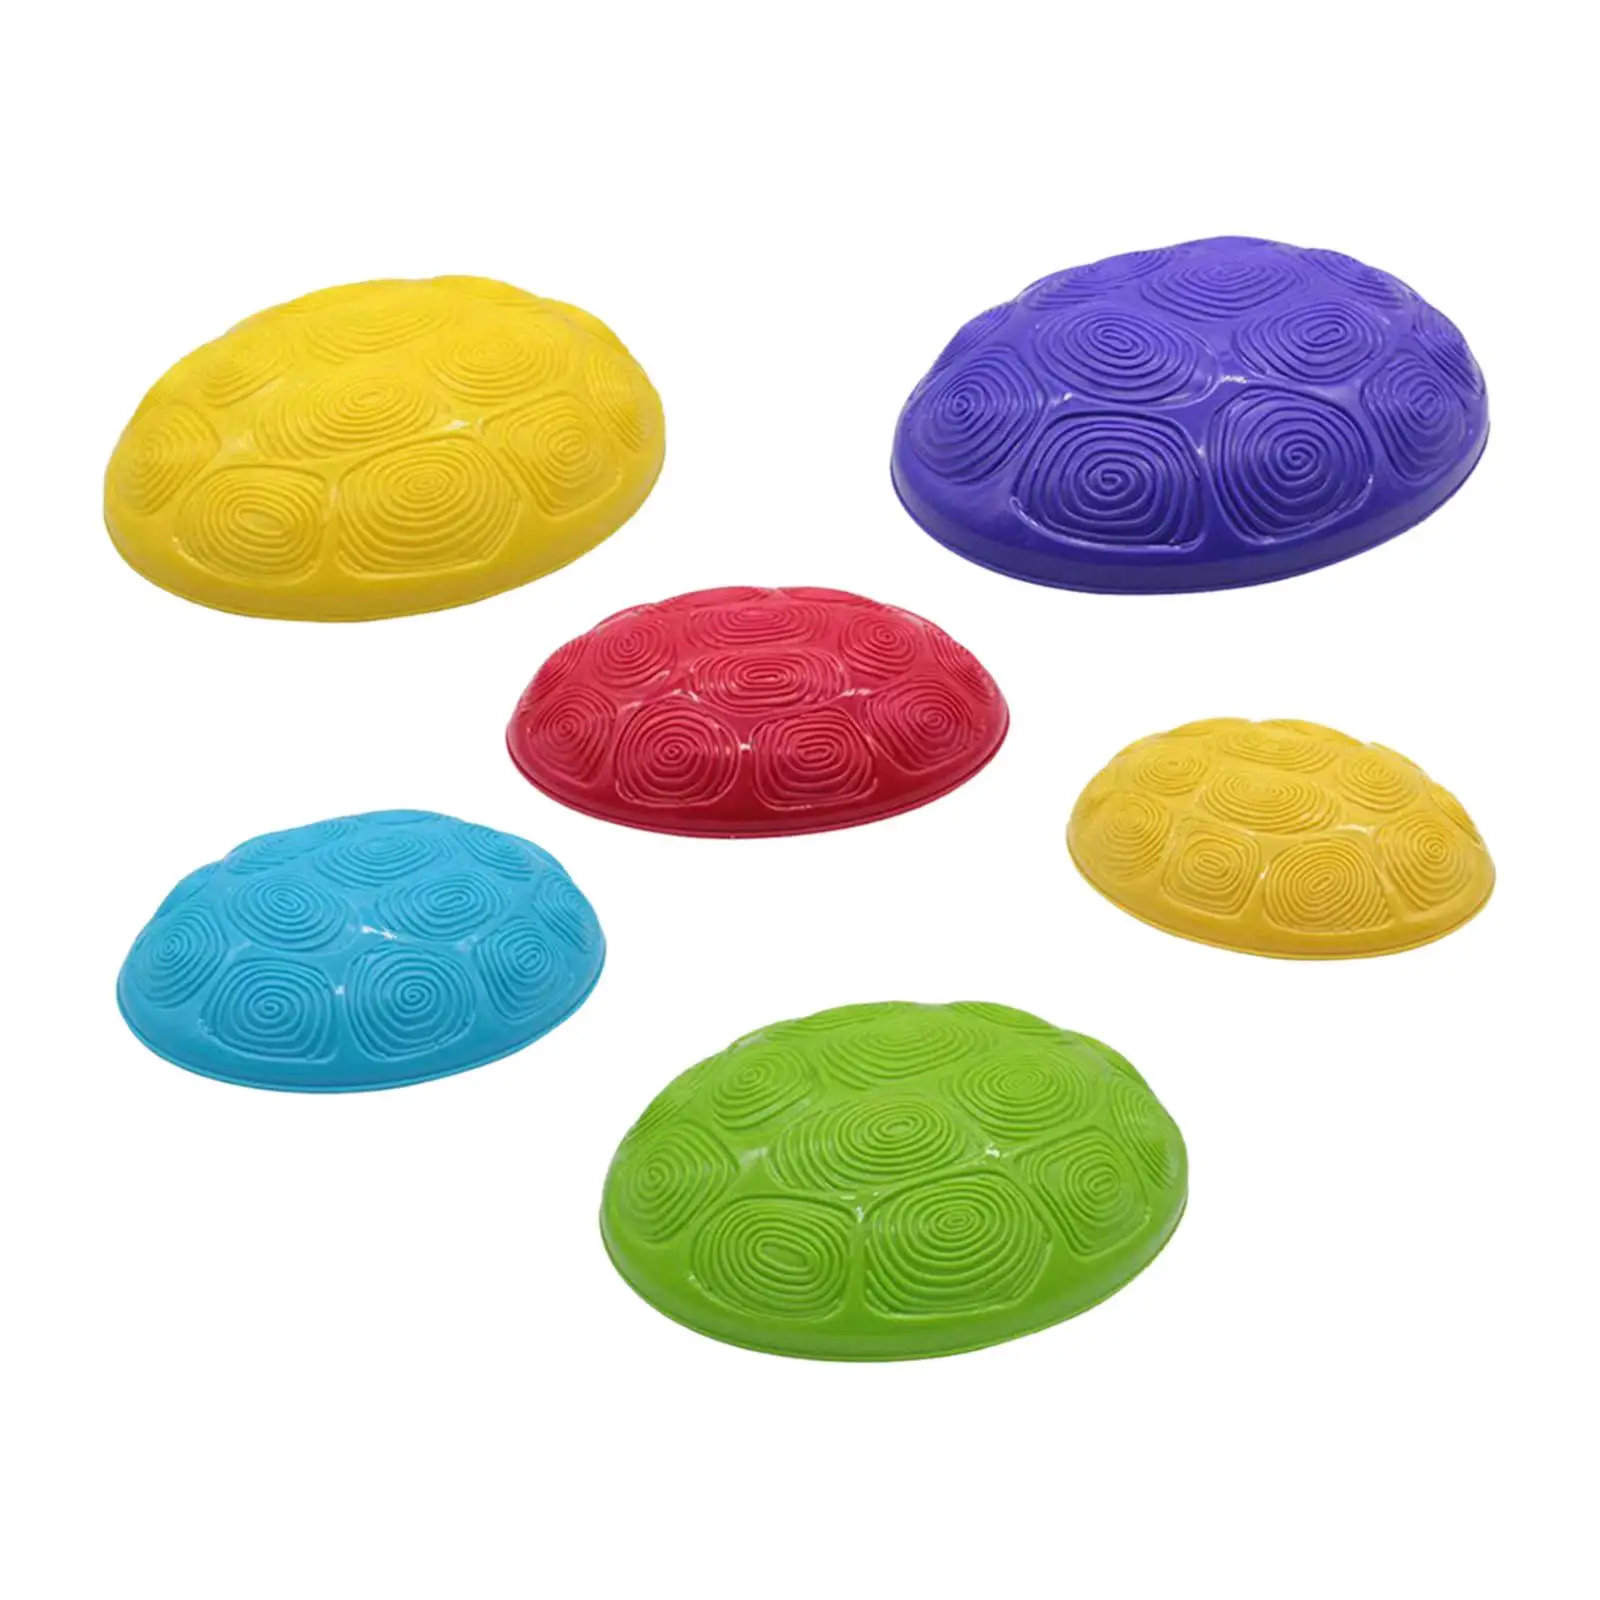 6x Balance Stepping stone Play Equipment Gross Motor Development Crossing River stone Turtle jump stone for Indoor Family